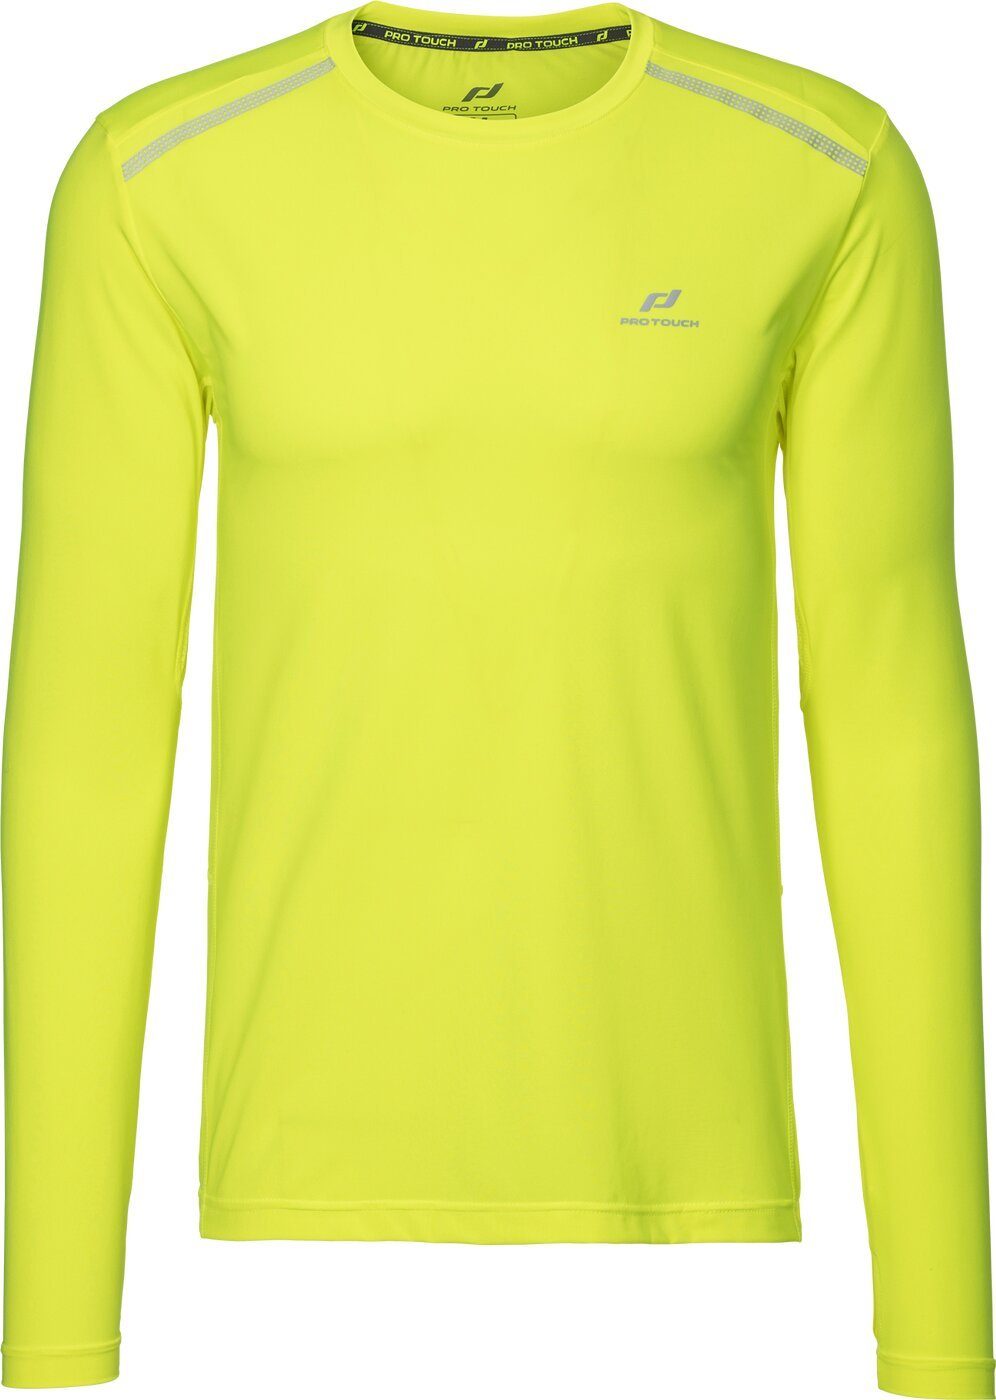 Funktionsshirt He.-Langarmshirt LIGHT YELLOW Pro ux Aimo Touch